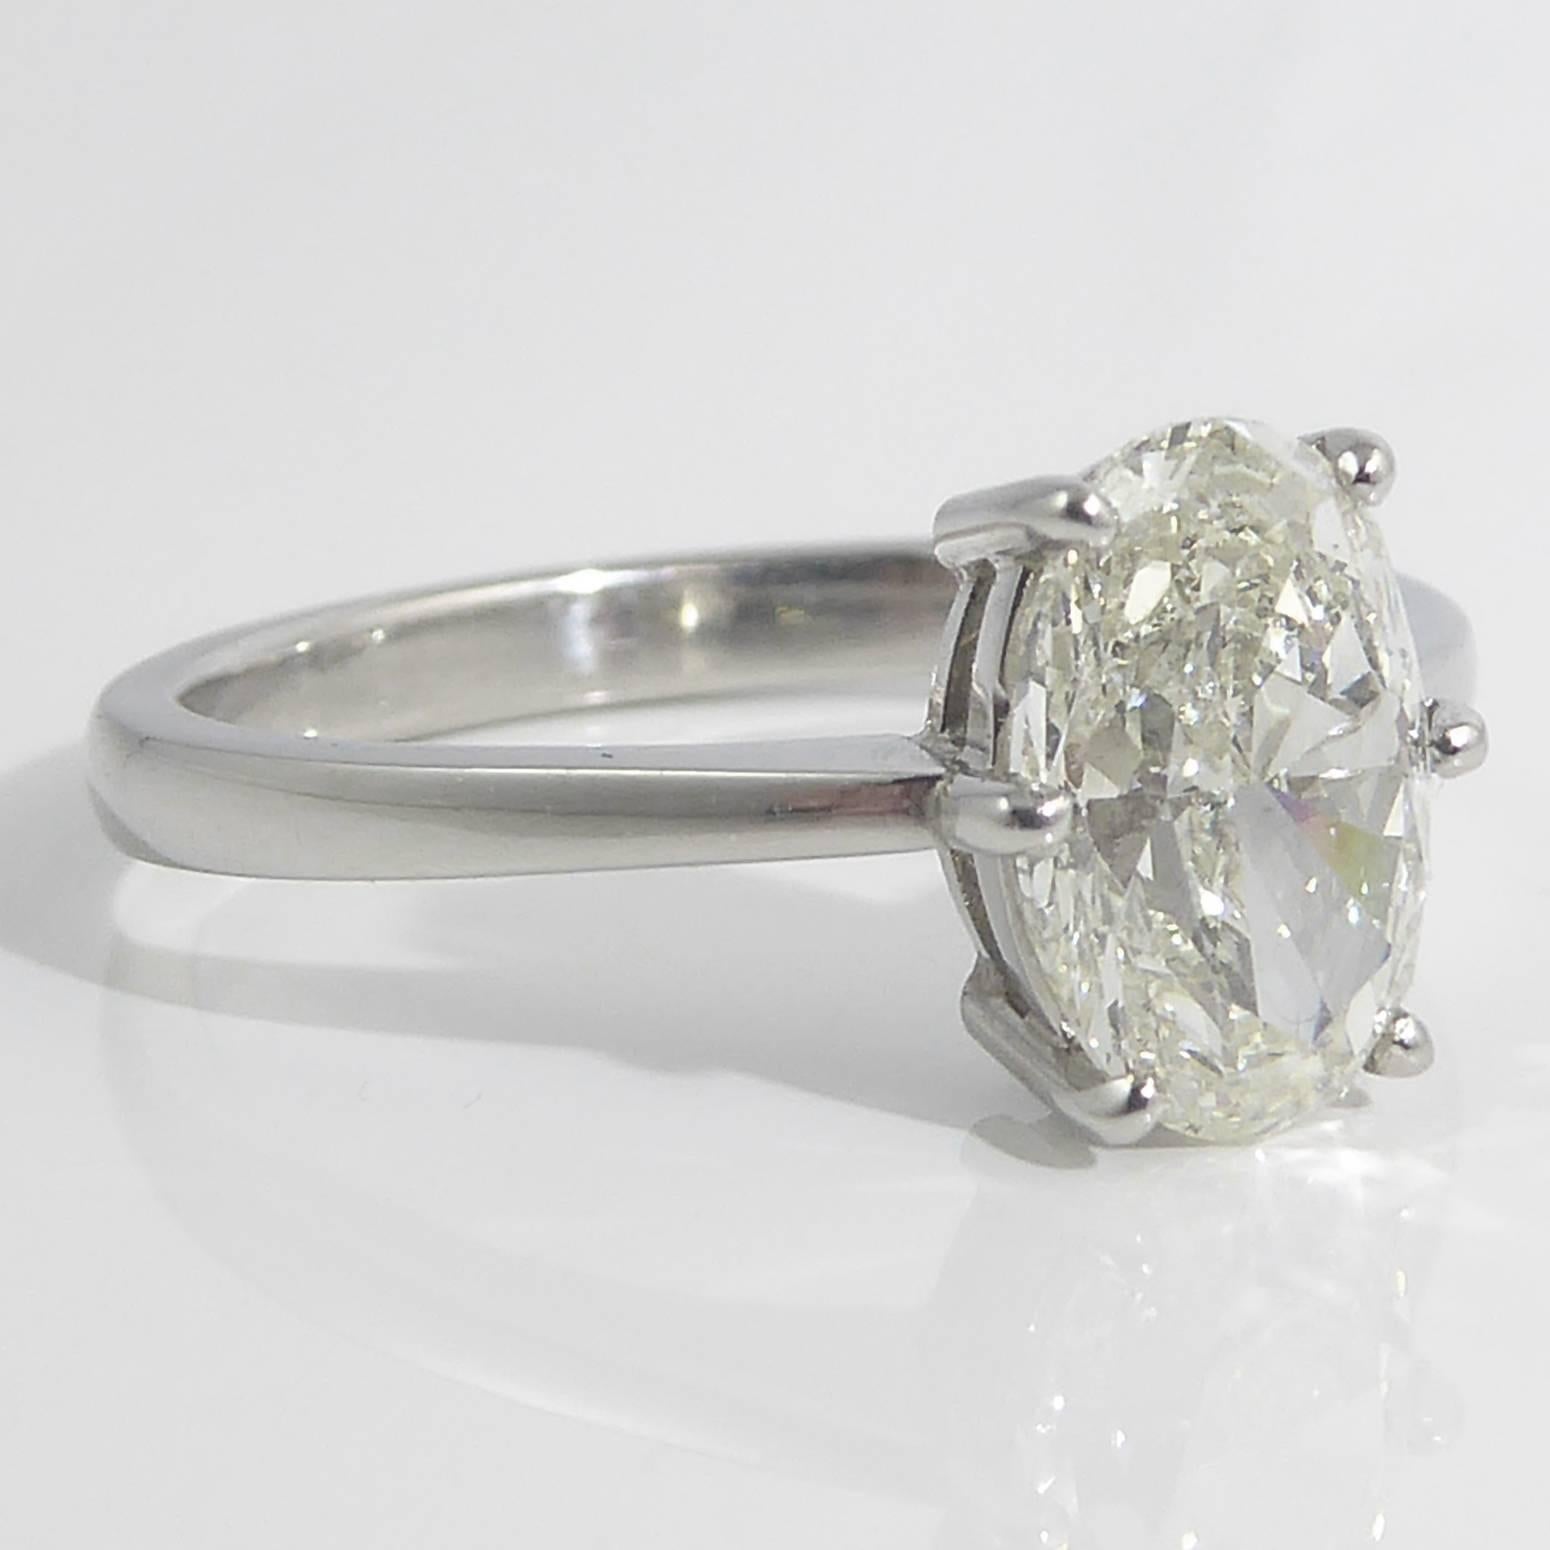 Fabulous oval shaped brilliant cut diamond in a solitaire diamond ring setting.  Six claws hold the diamond onto an open dual band gallery which allows the maximum light to disperse through the facets of the stone The band is a slight D shaped